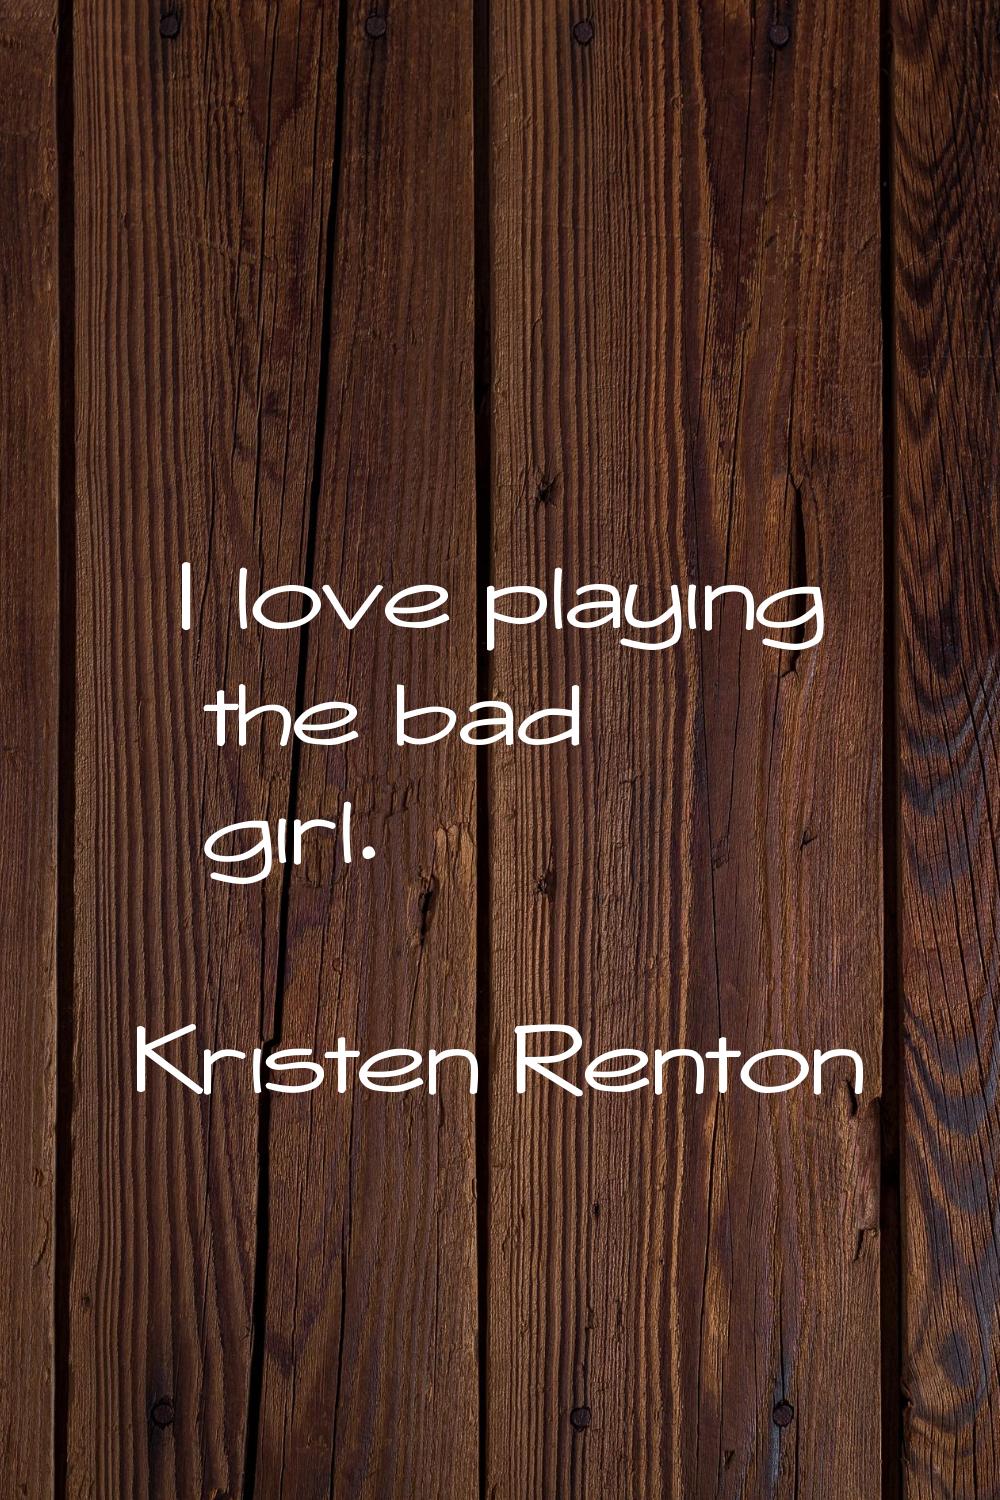 I love playing the bad girl.